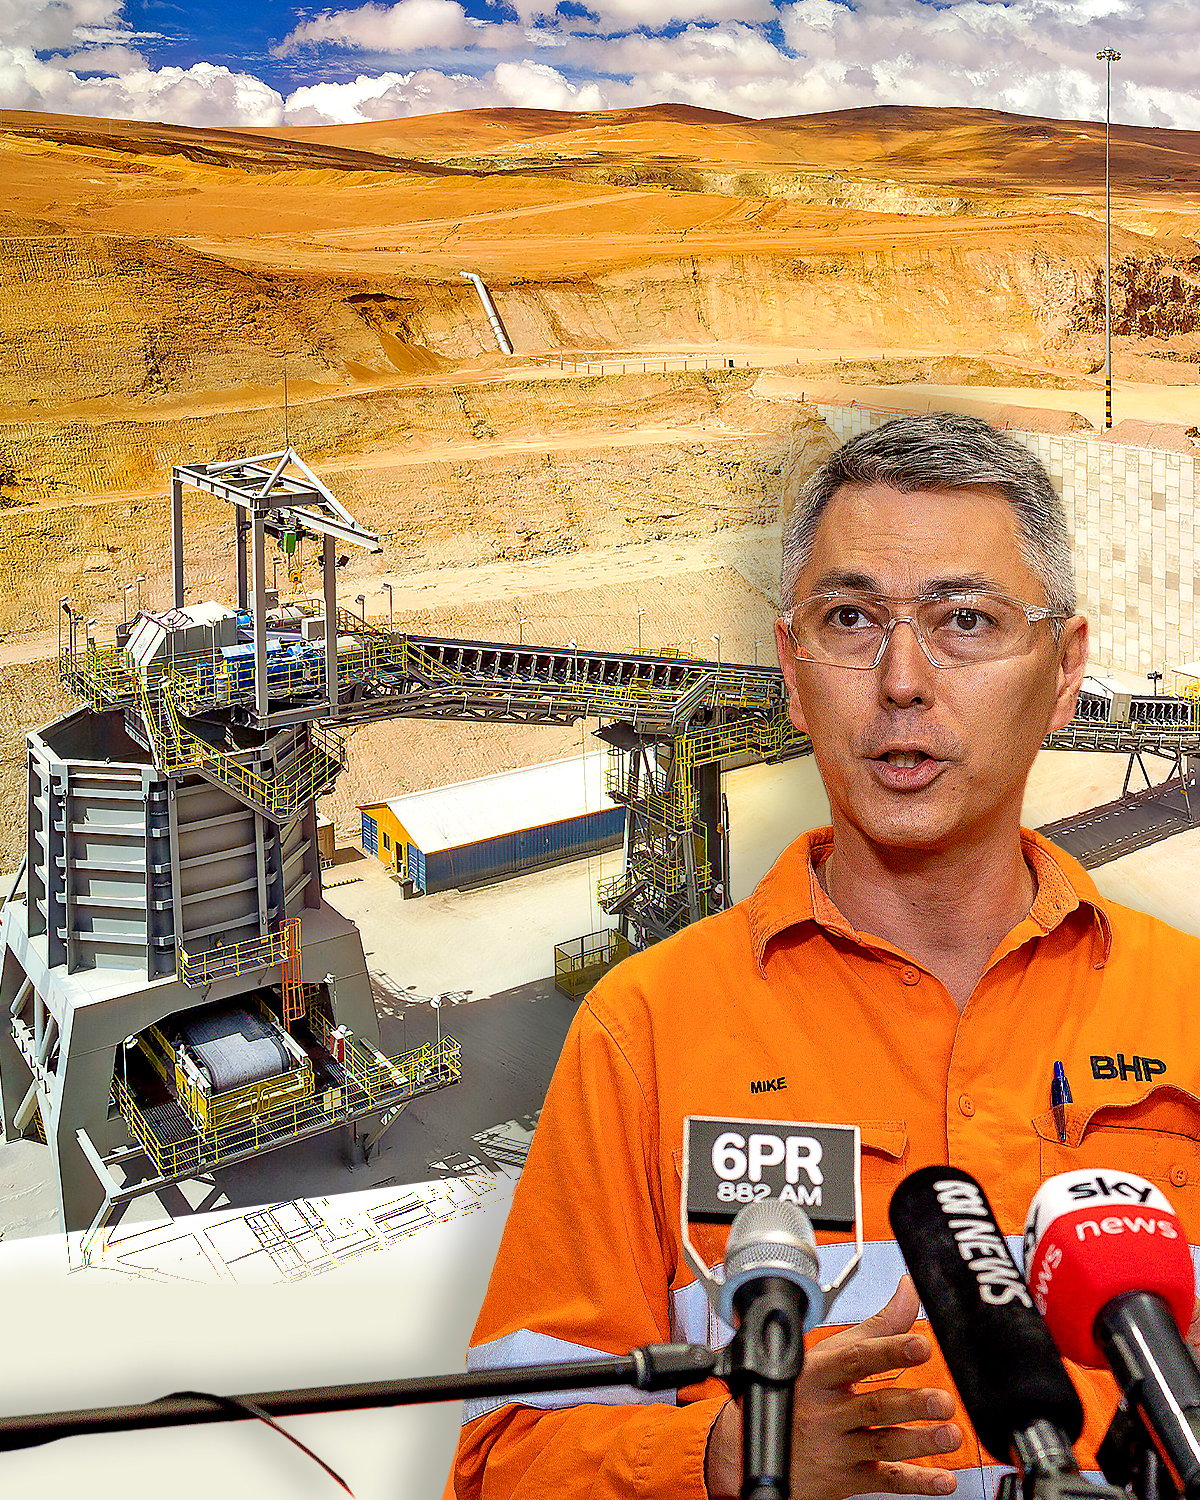 Mike Henry bet heavily on nickel and the green revolution, but competitors in Indonesia came out on top. Now the BHP chief is eyeing up Anglo American’s assets